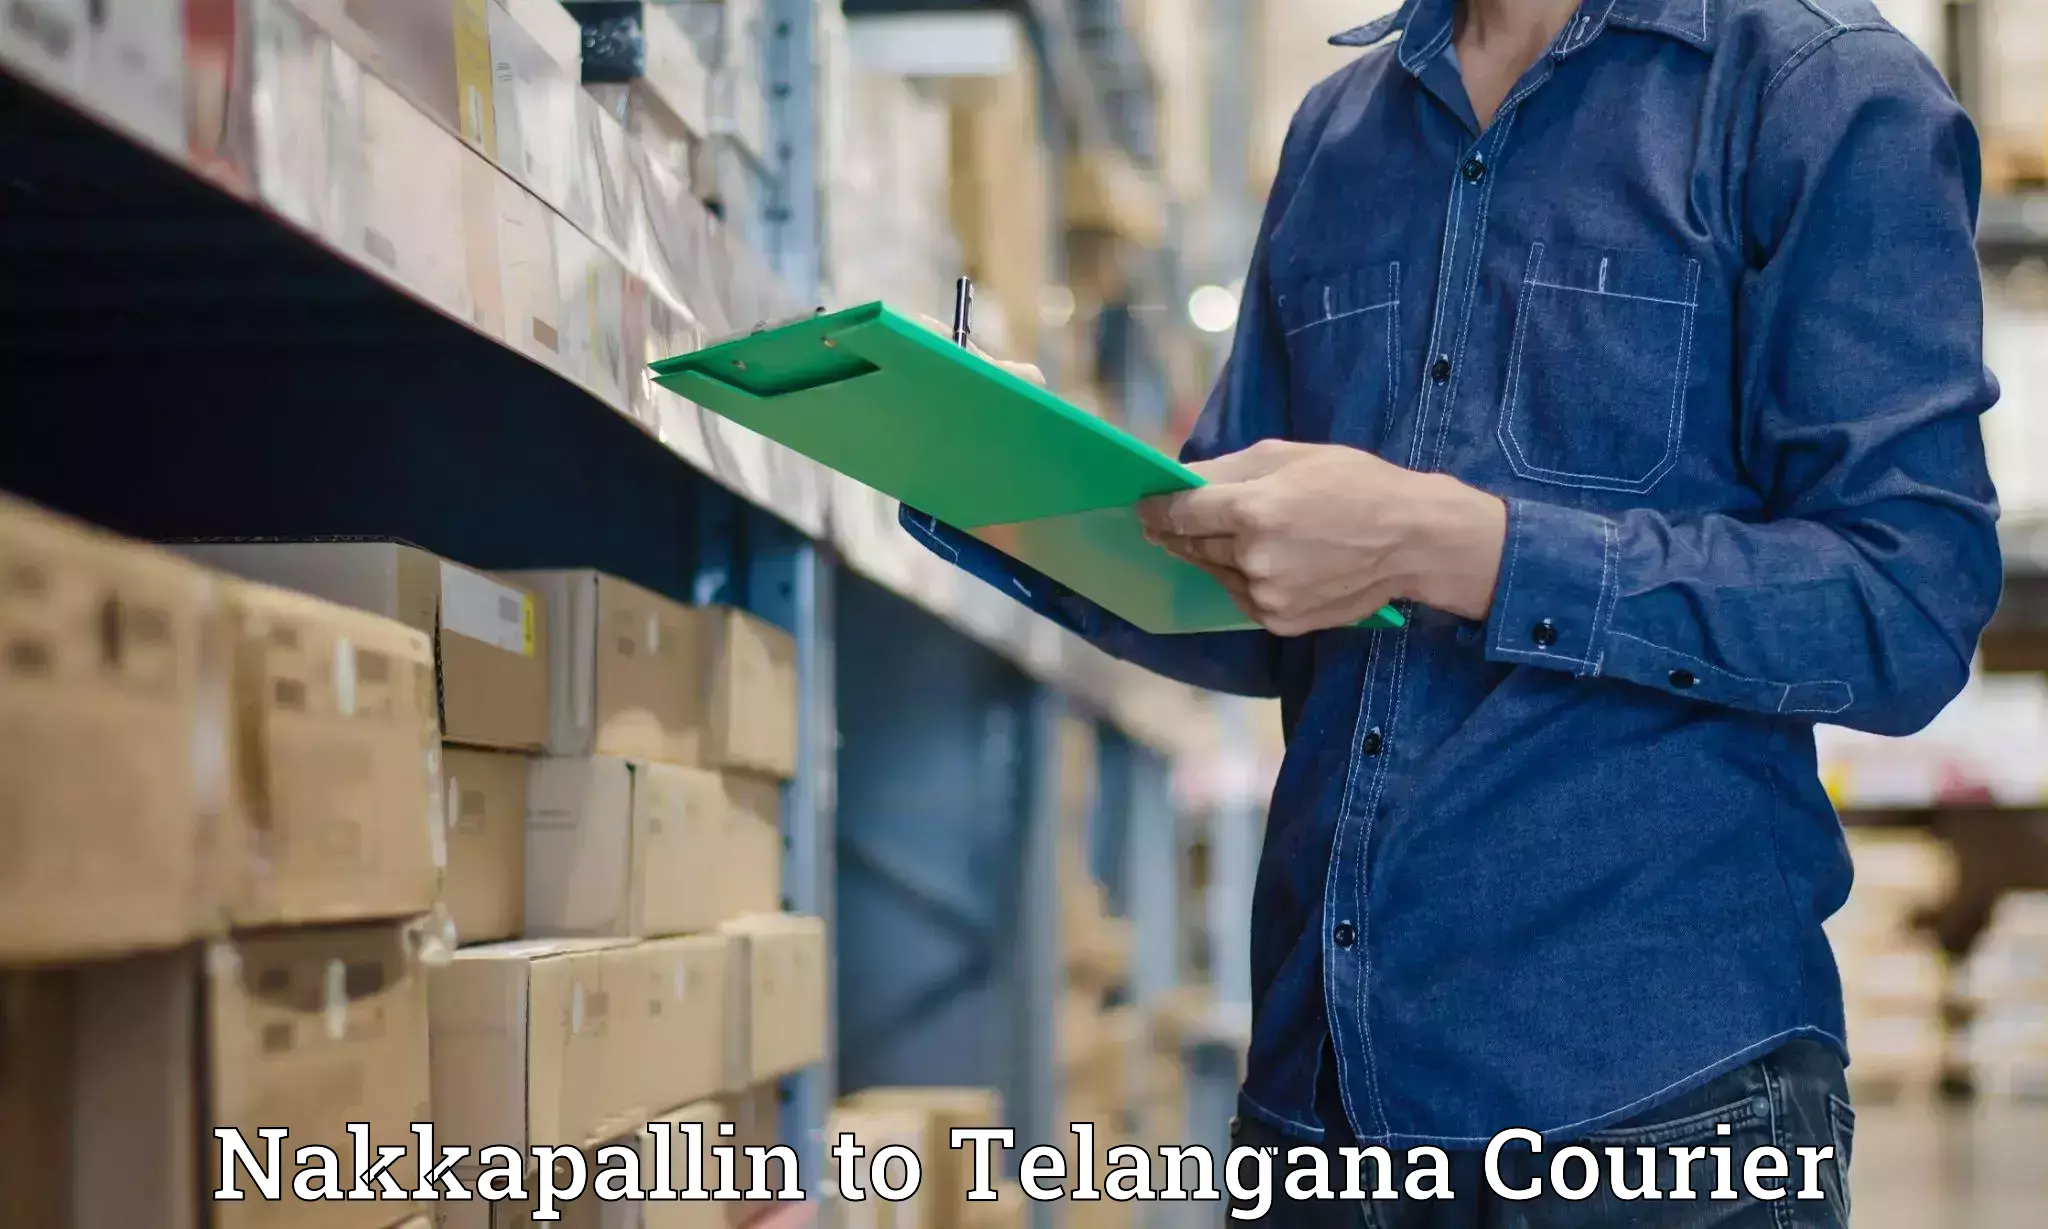 Easy access courier services in Nakkapallin to Patancheru